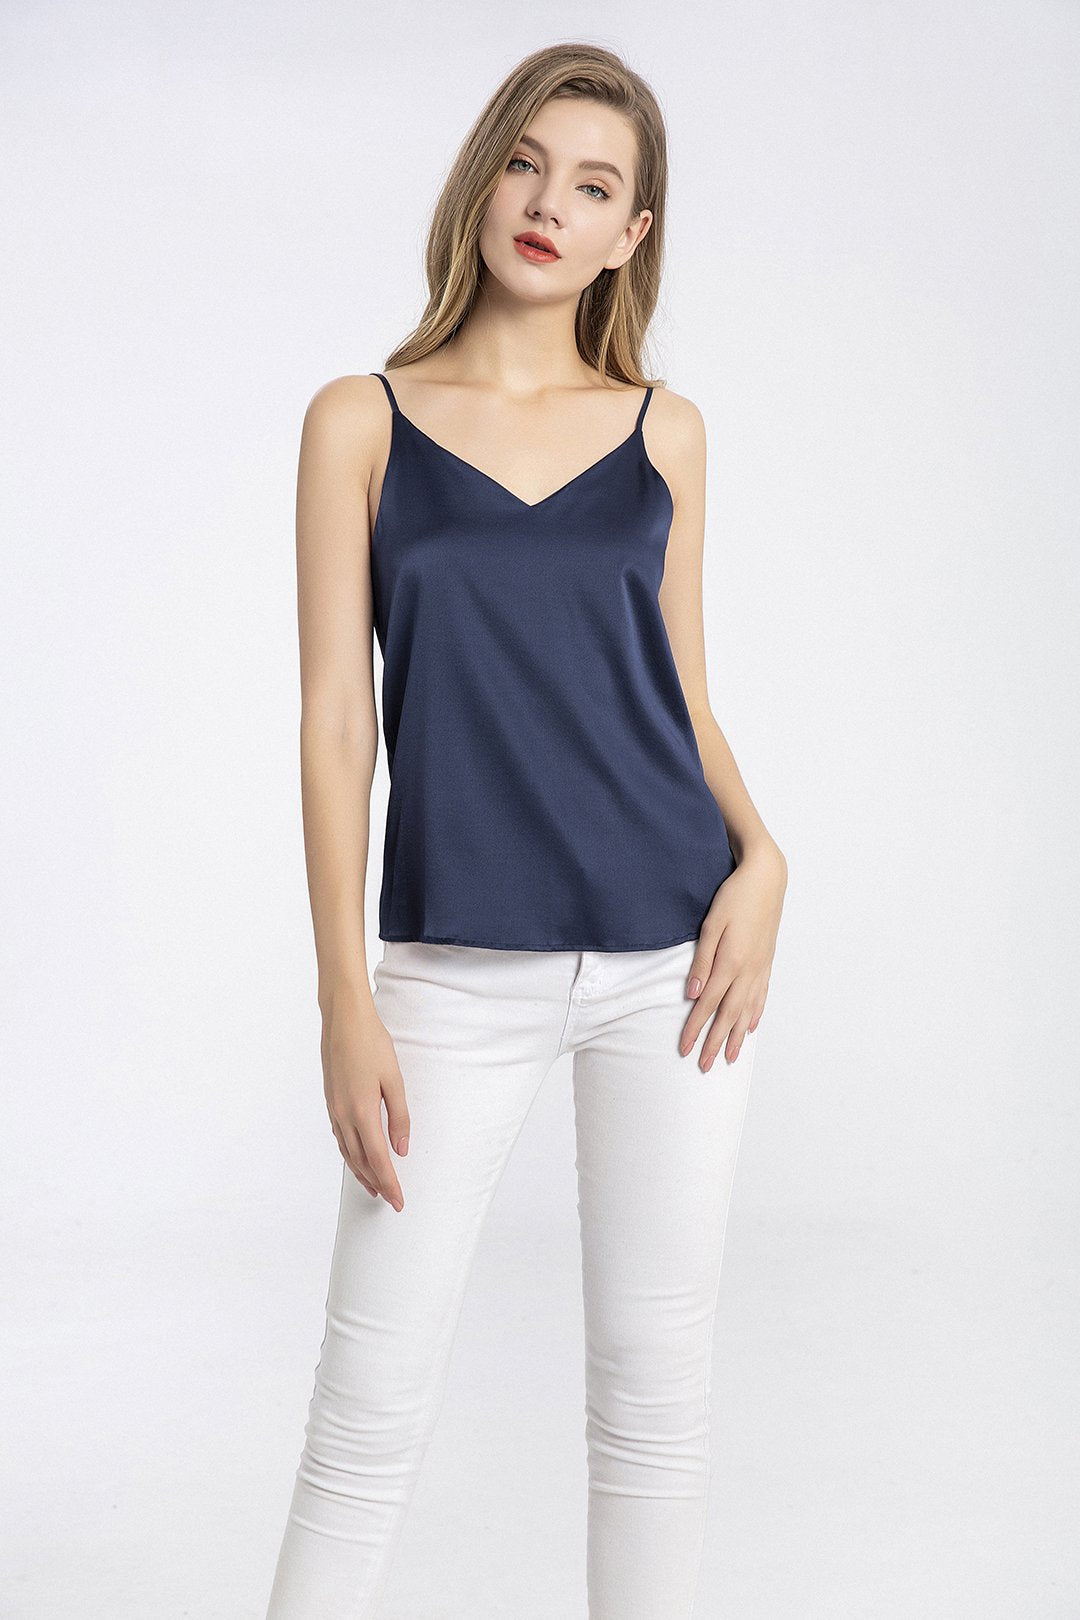 100% Premium Mulberry Silk Cami Top With Gift Box- Navy, 54% OFF